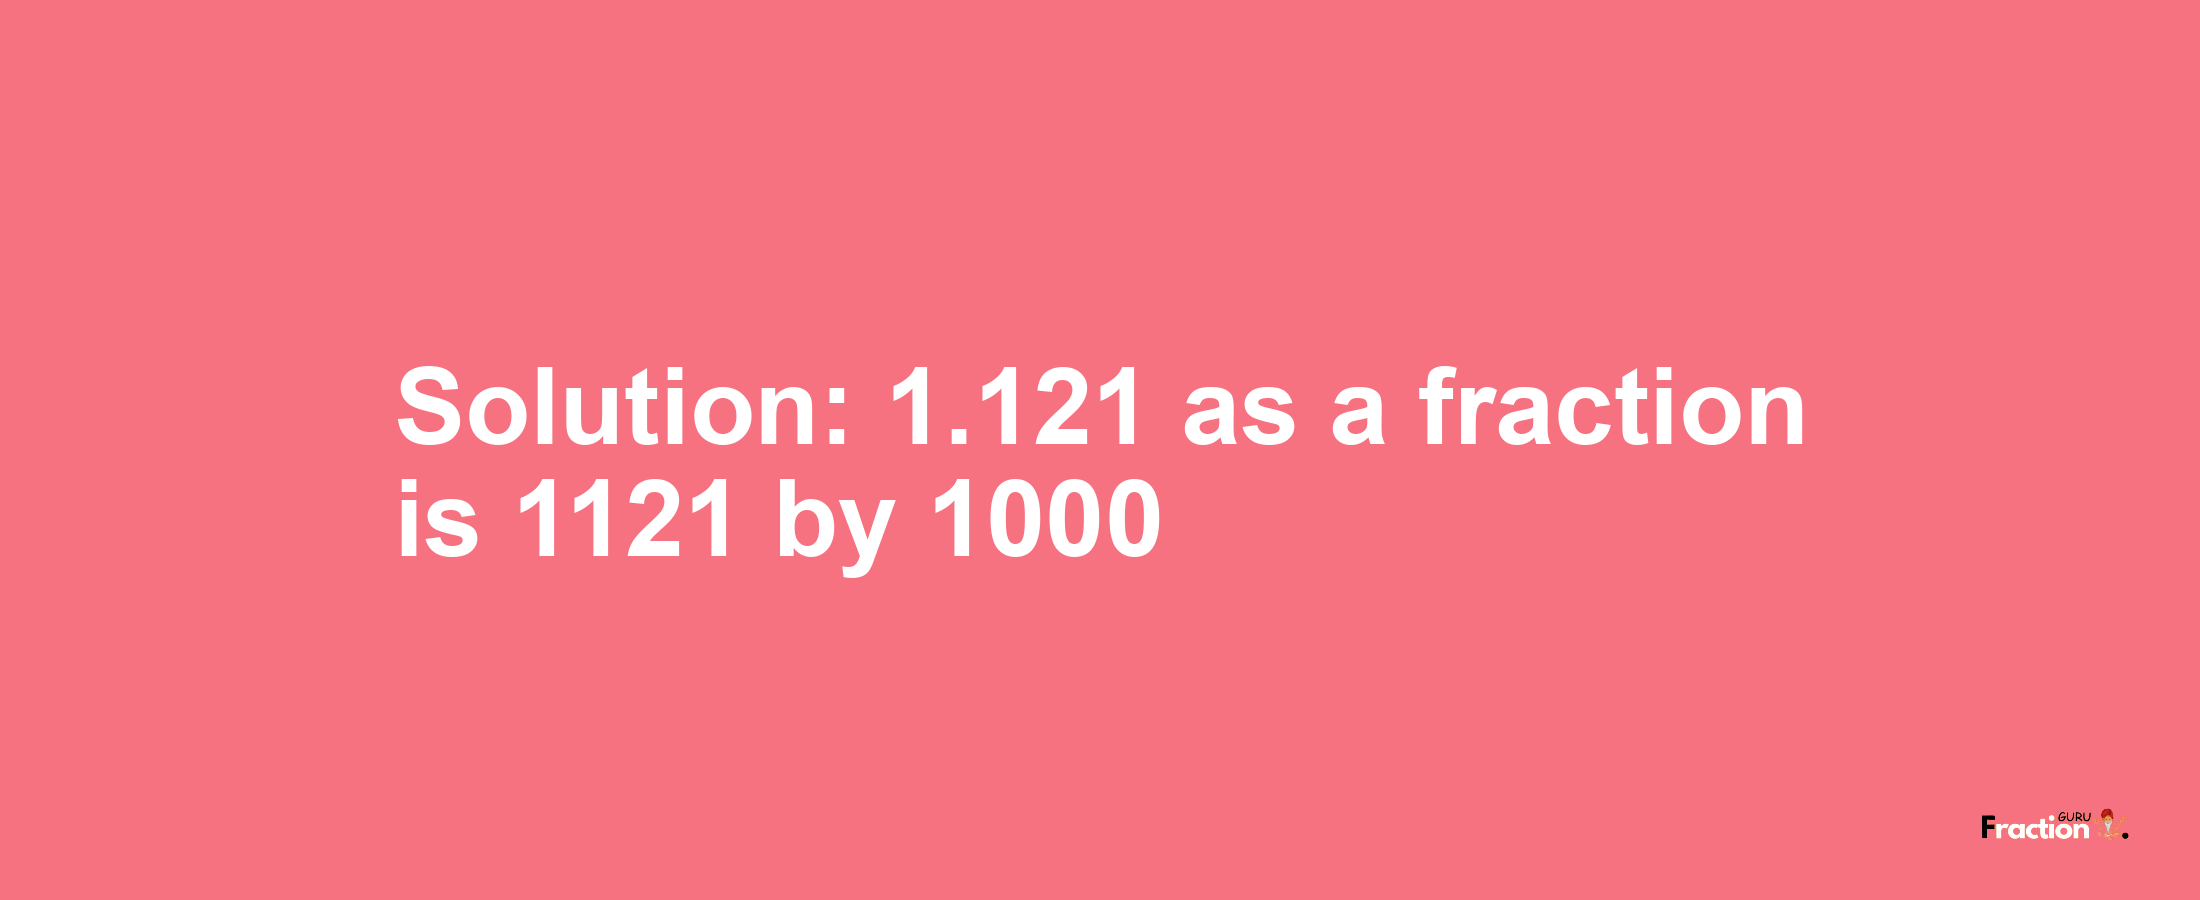 Solution:1.121 as a fraction is 1121/1000